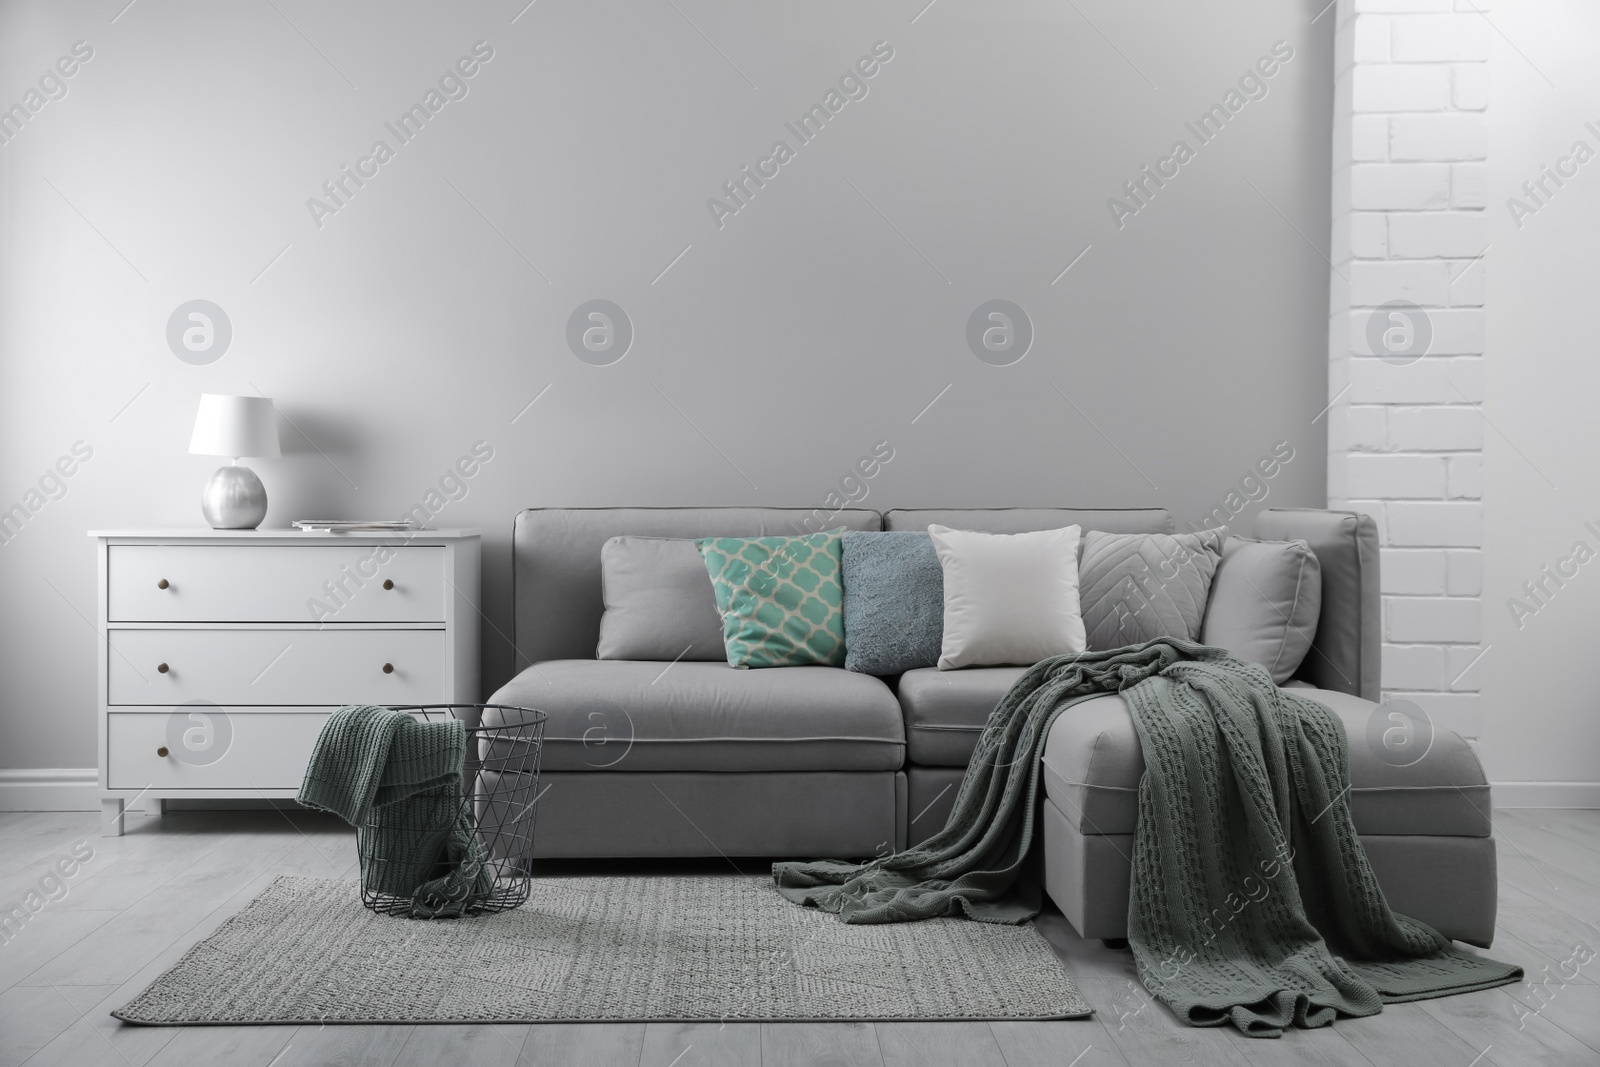 Photo of Large grey sofa and chest of drawers near light wall in room. Interior design